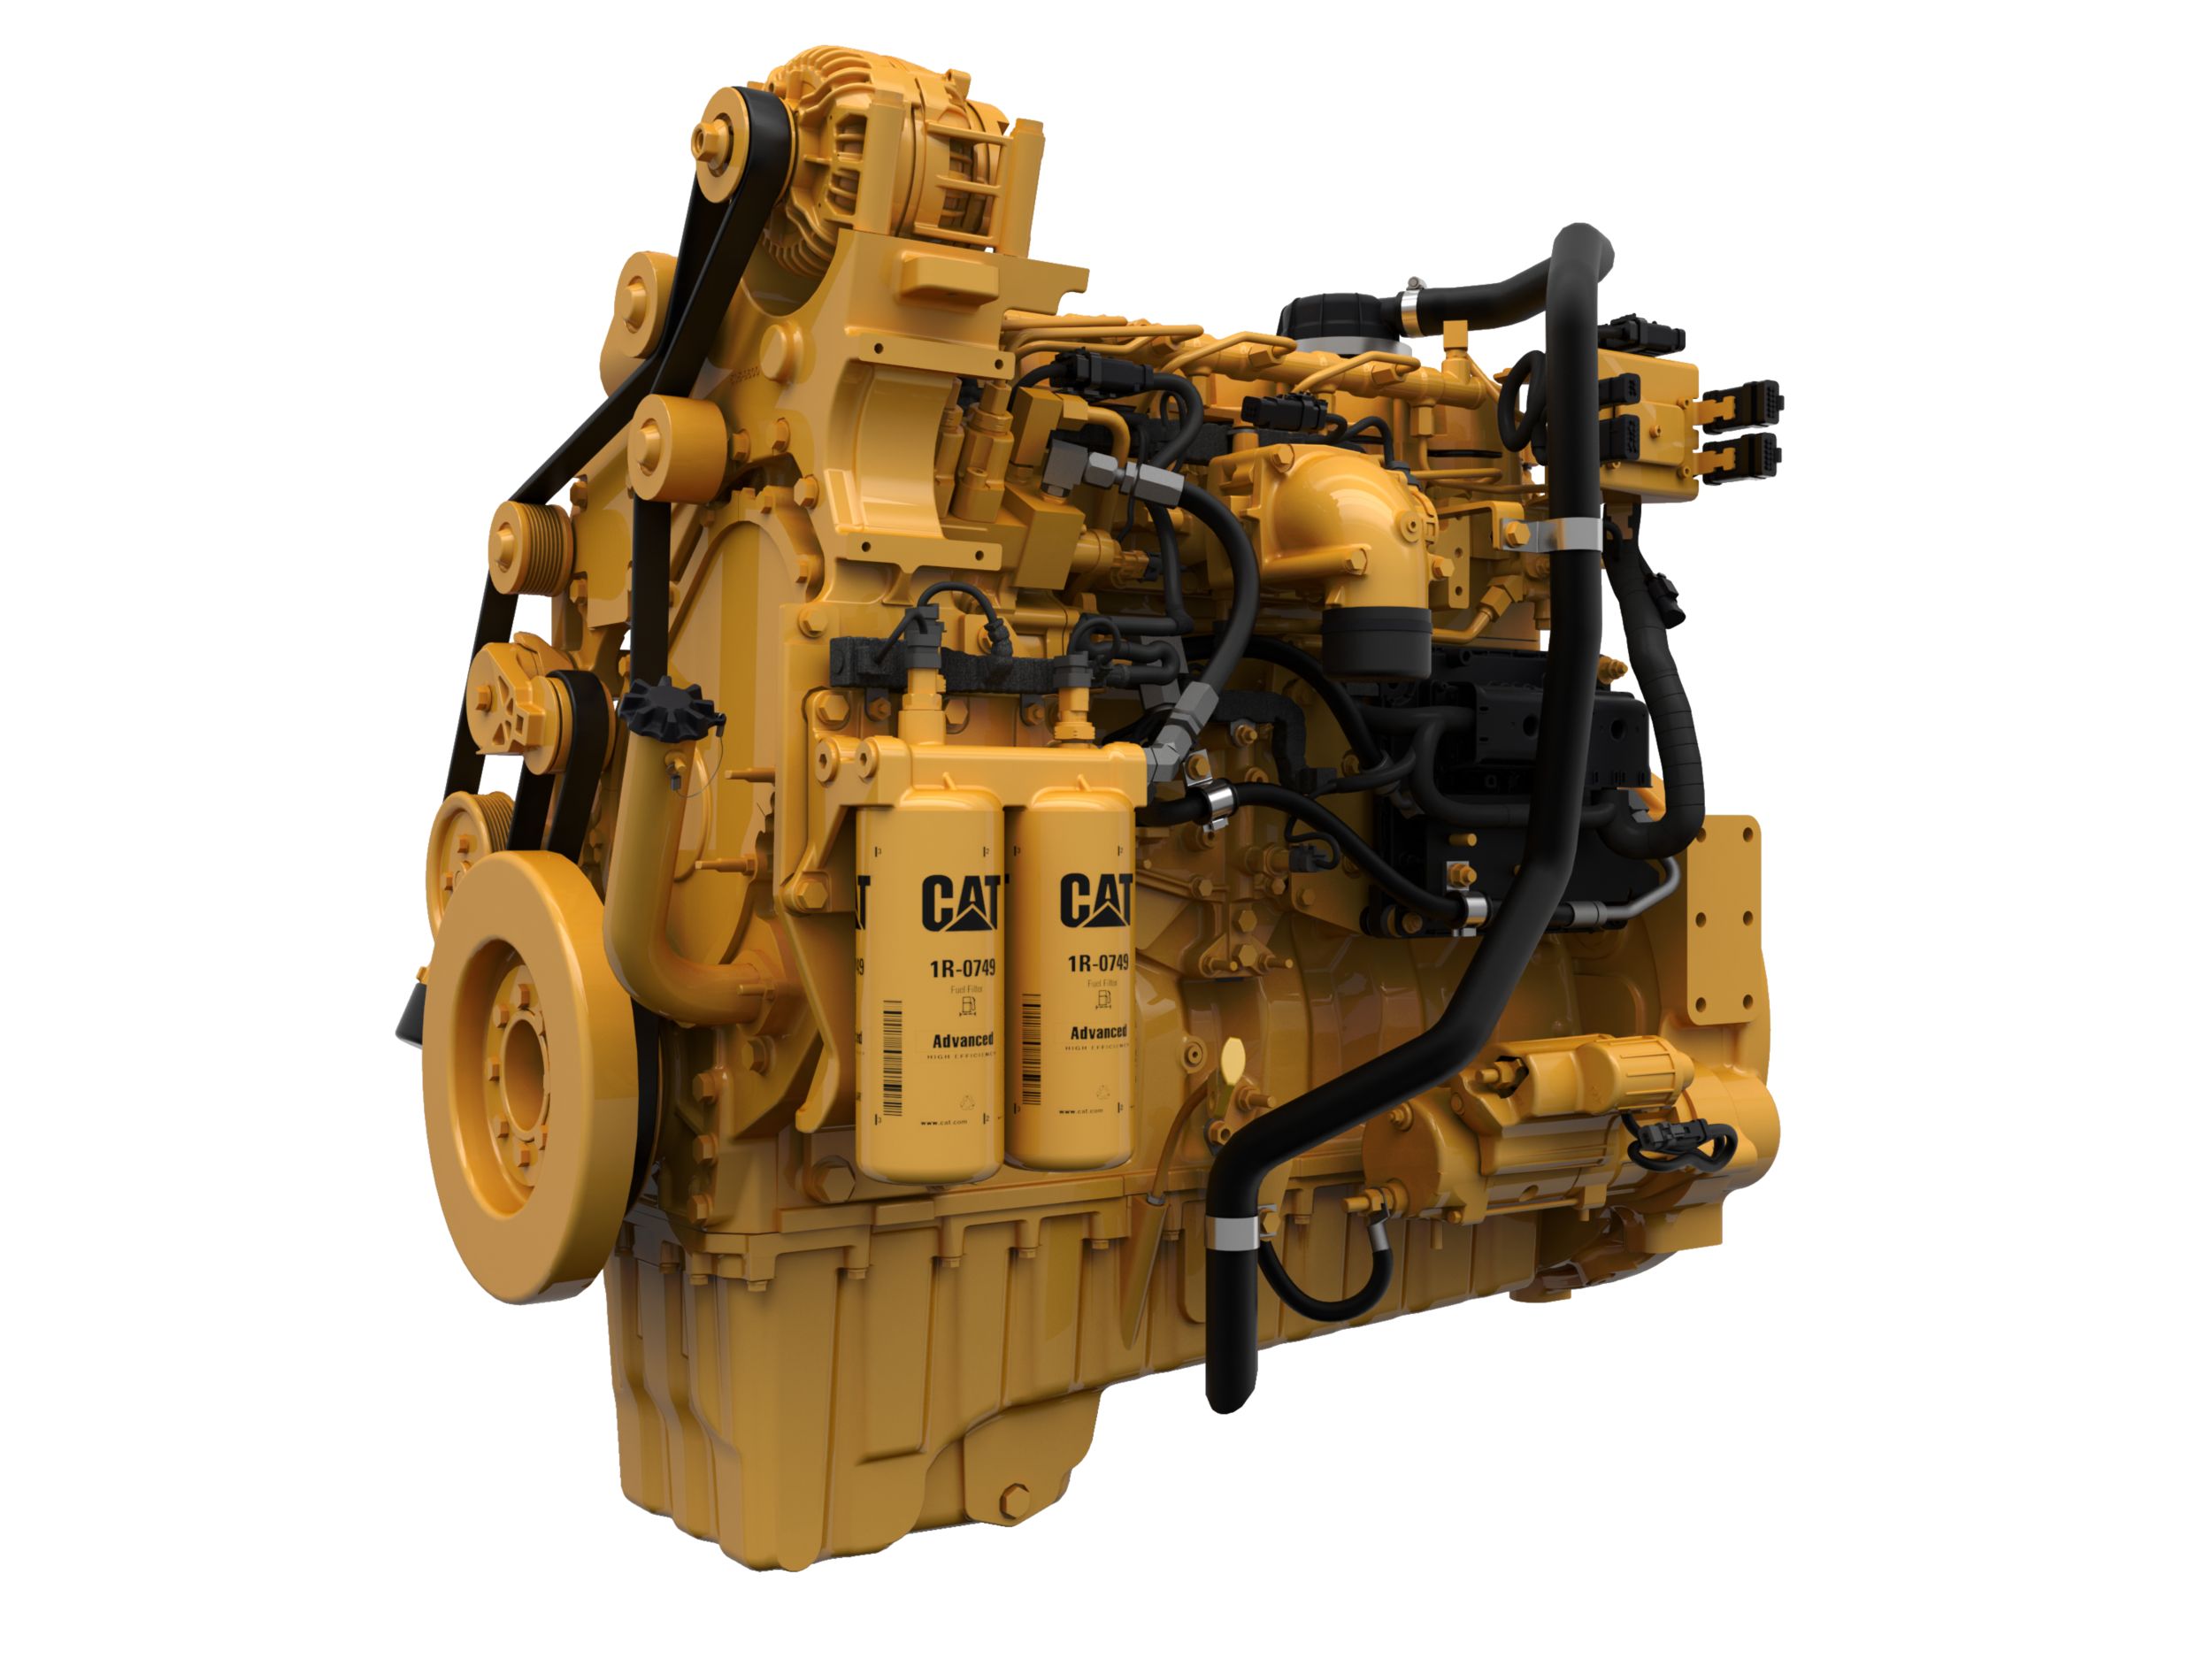 product-C9.3B Tier 4 Diesel Engines - Highly Regulated